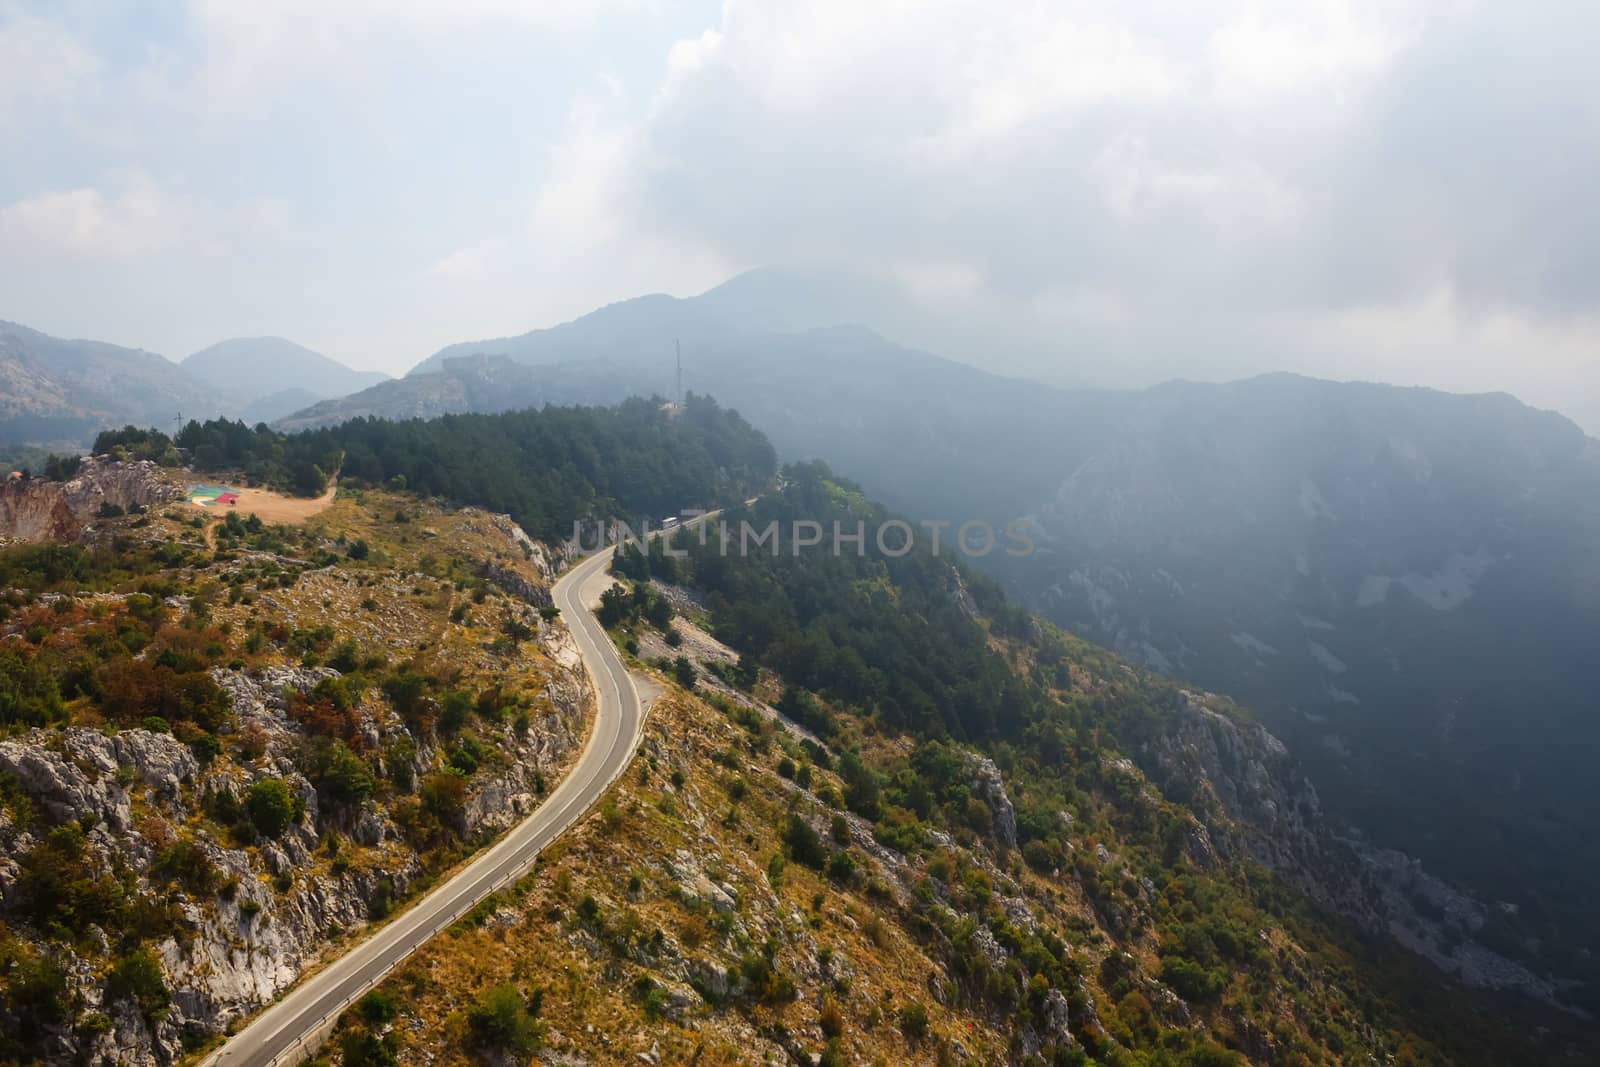 The mountain road in Montenegro. Top view